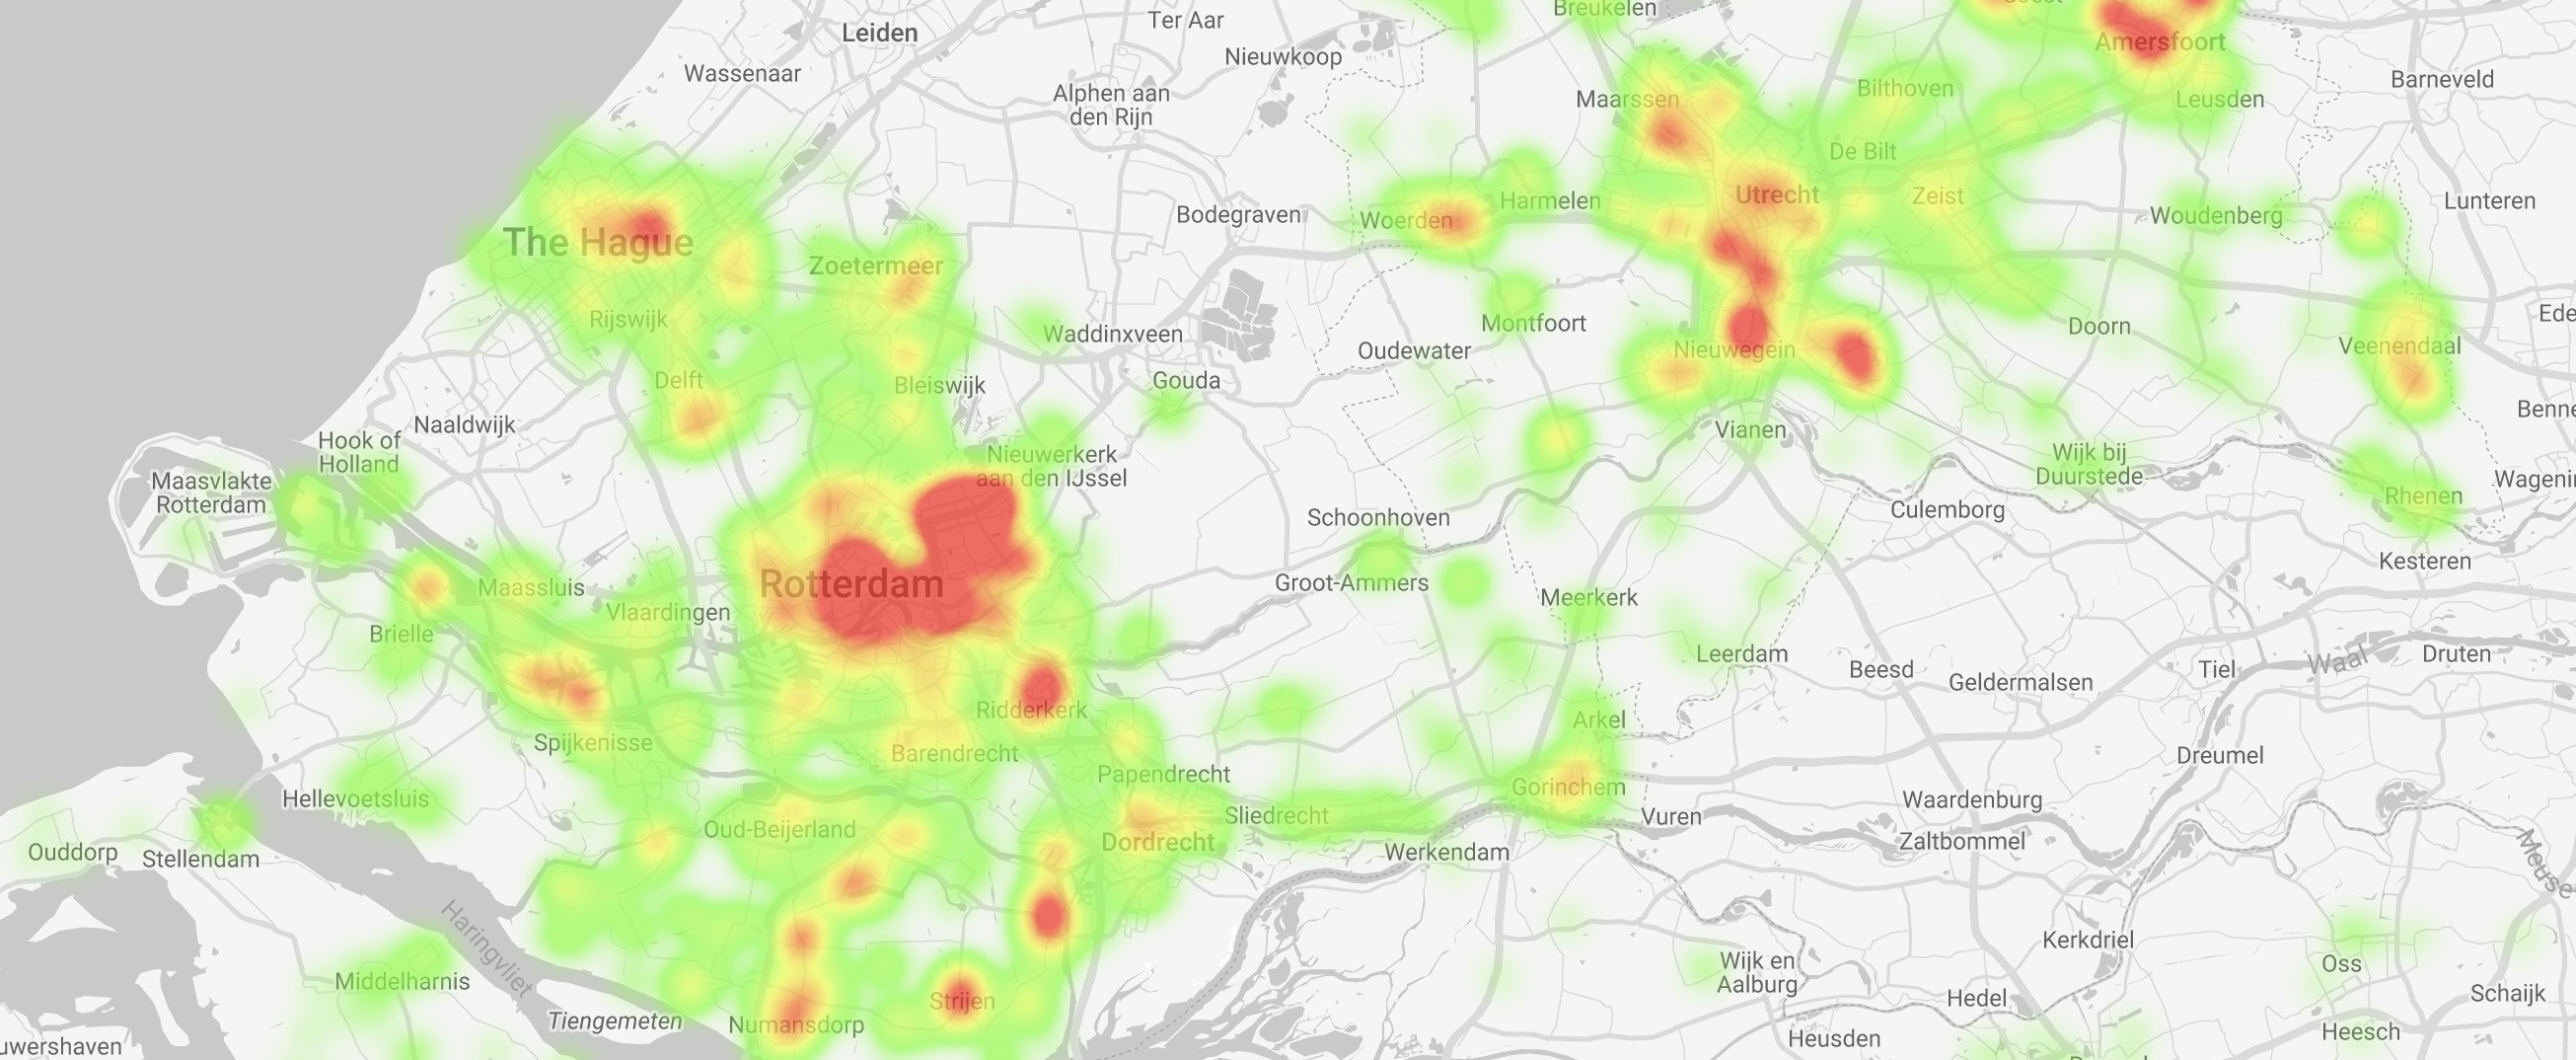 heat map by Maply